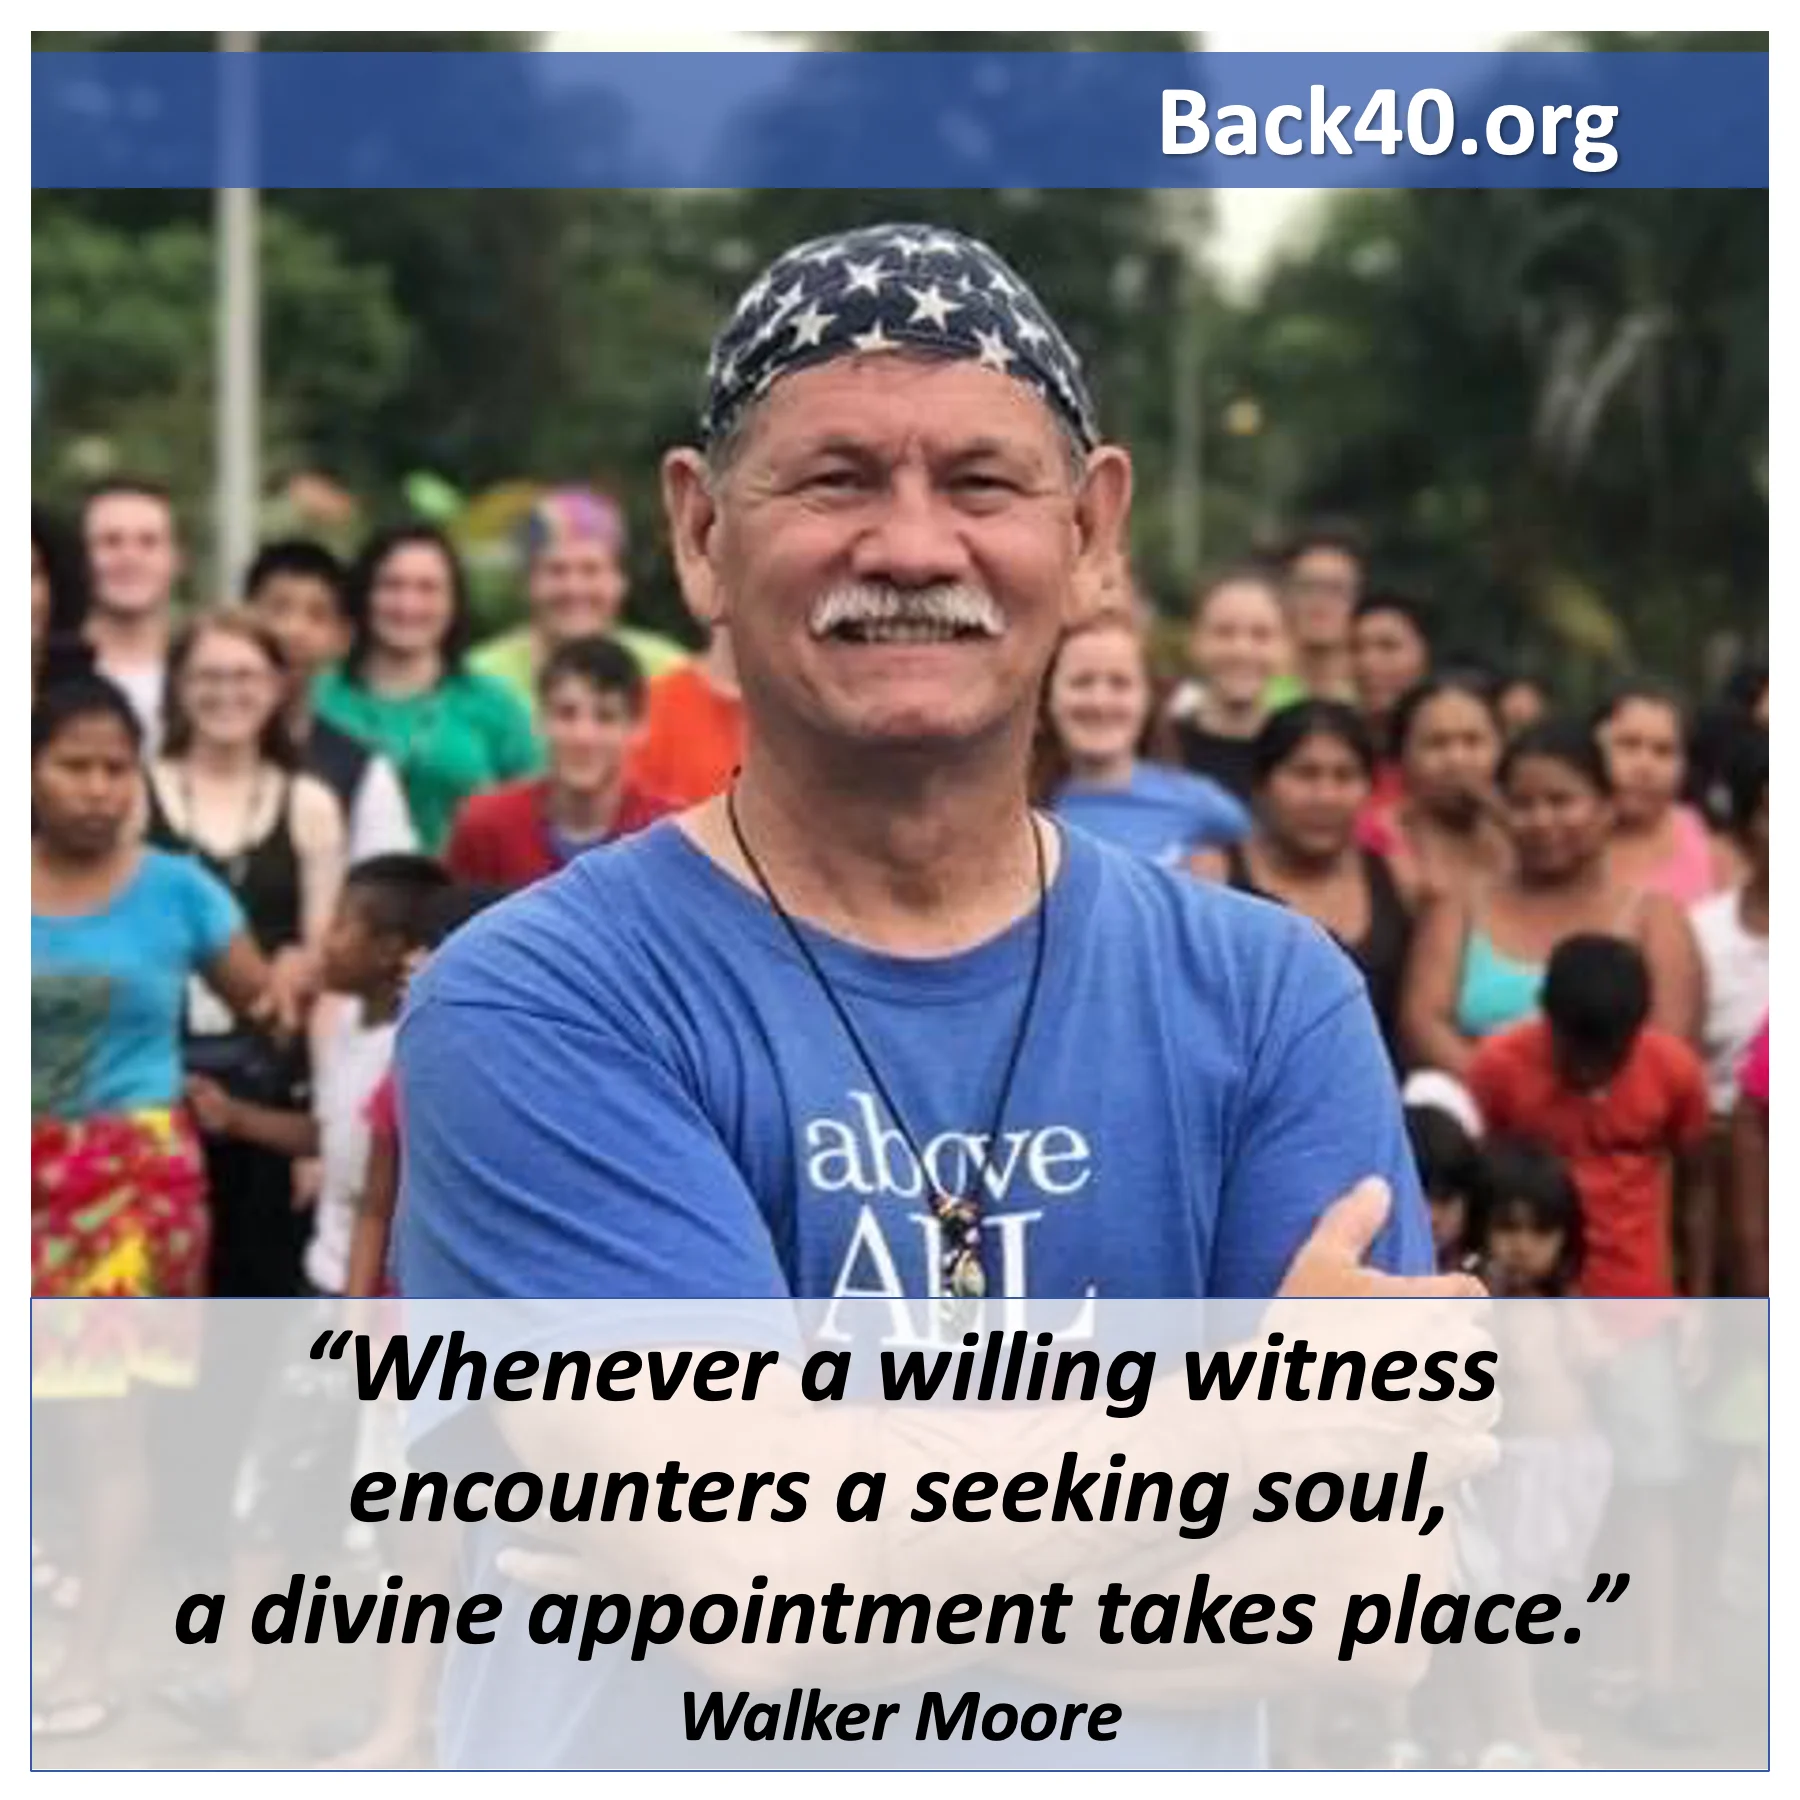 A willing witness and a seeking soul is a divine appointment.